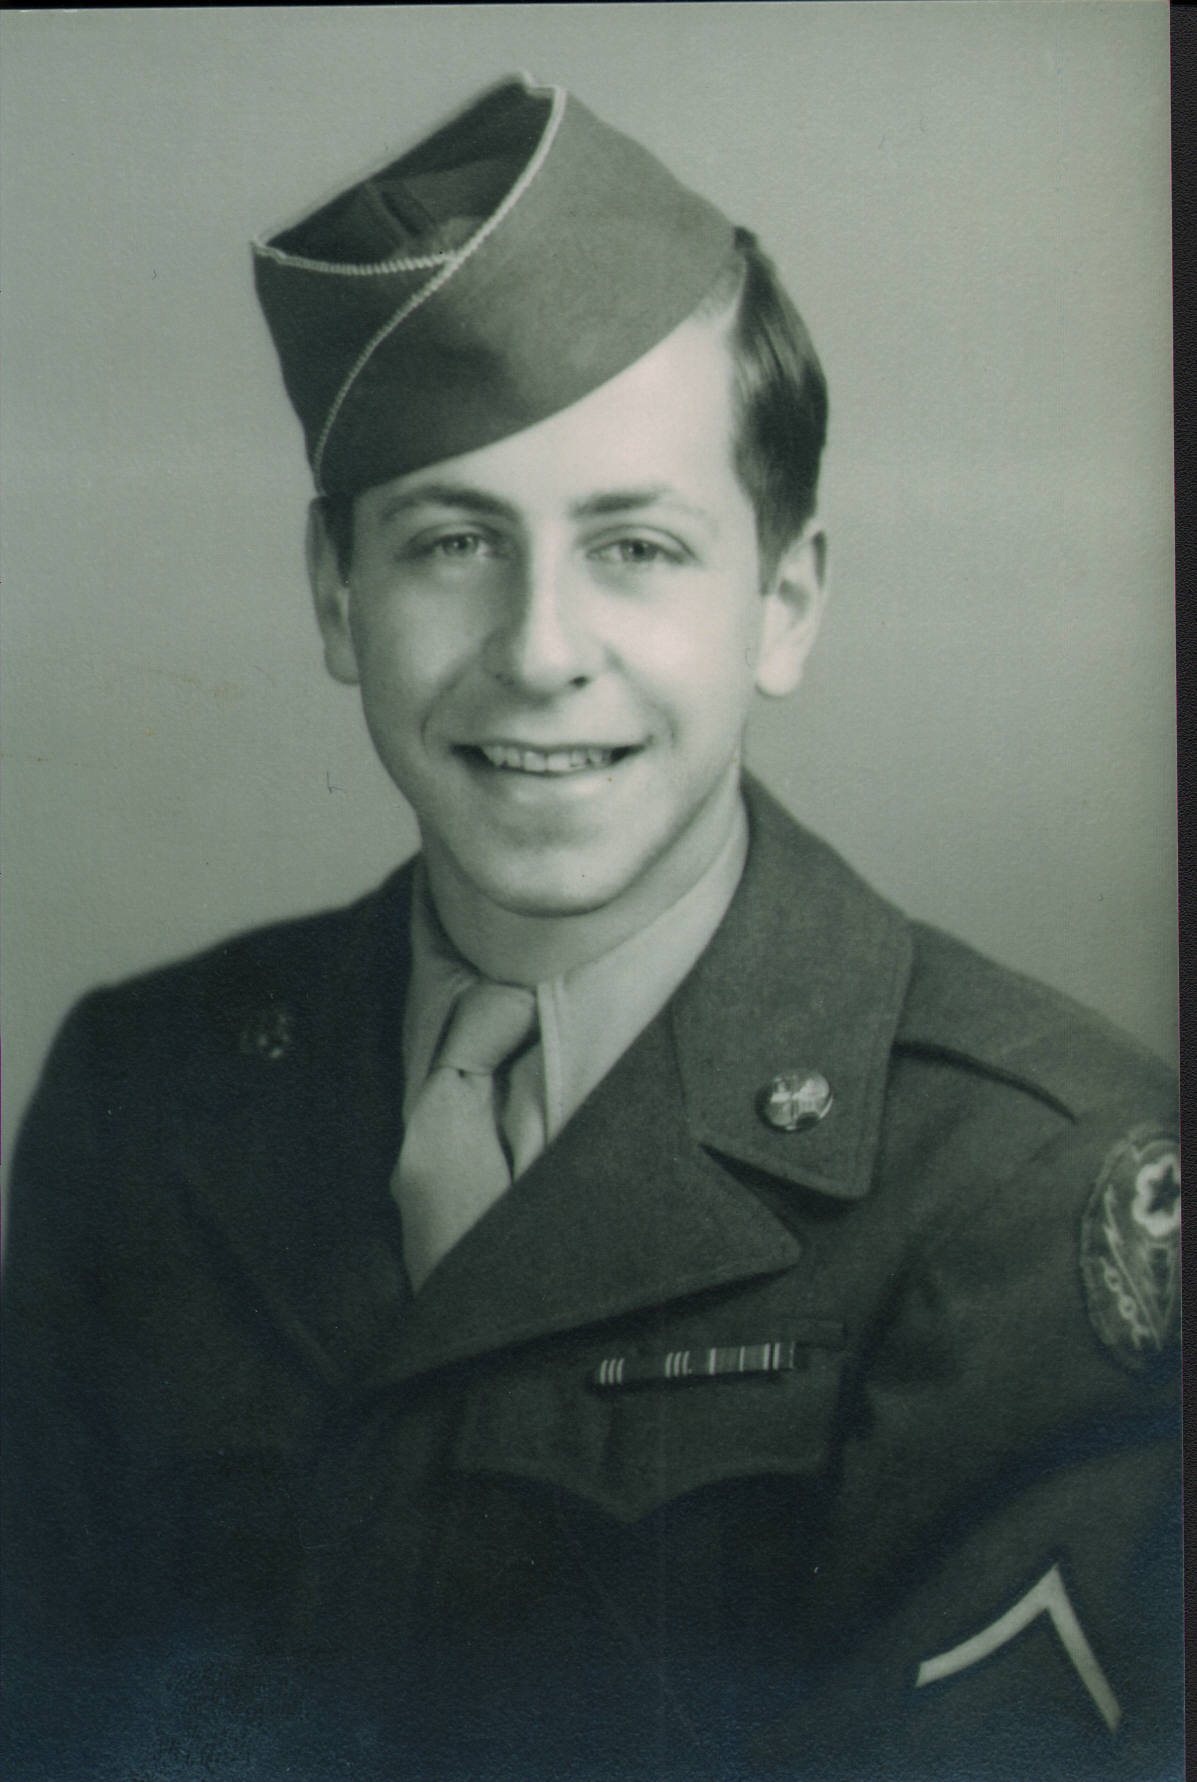 Paul Gusdorf in the army